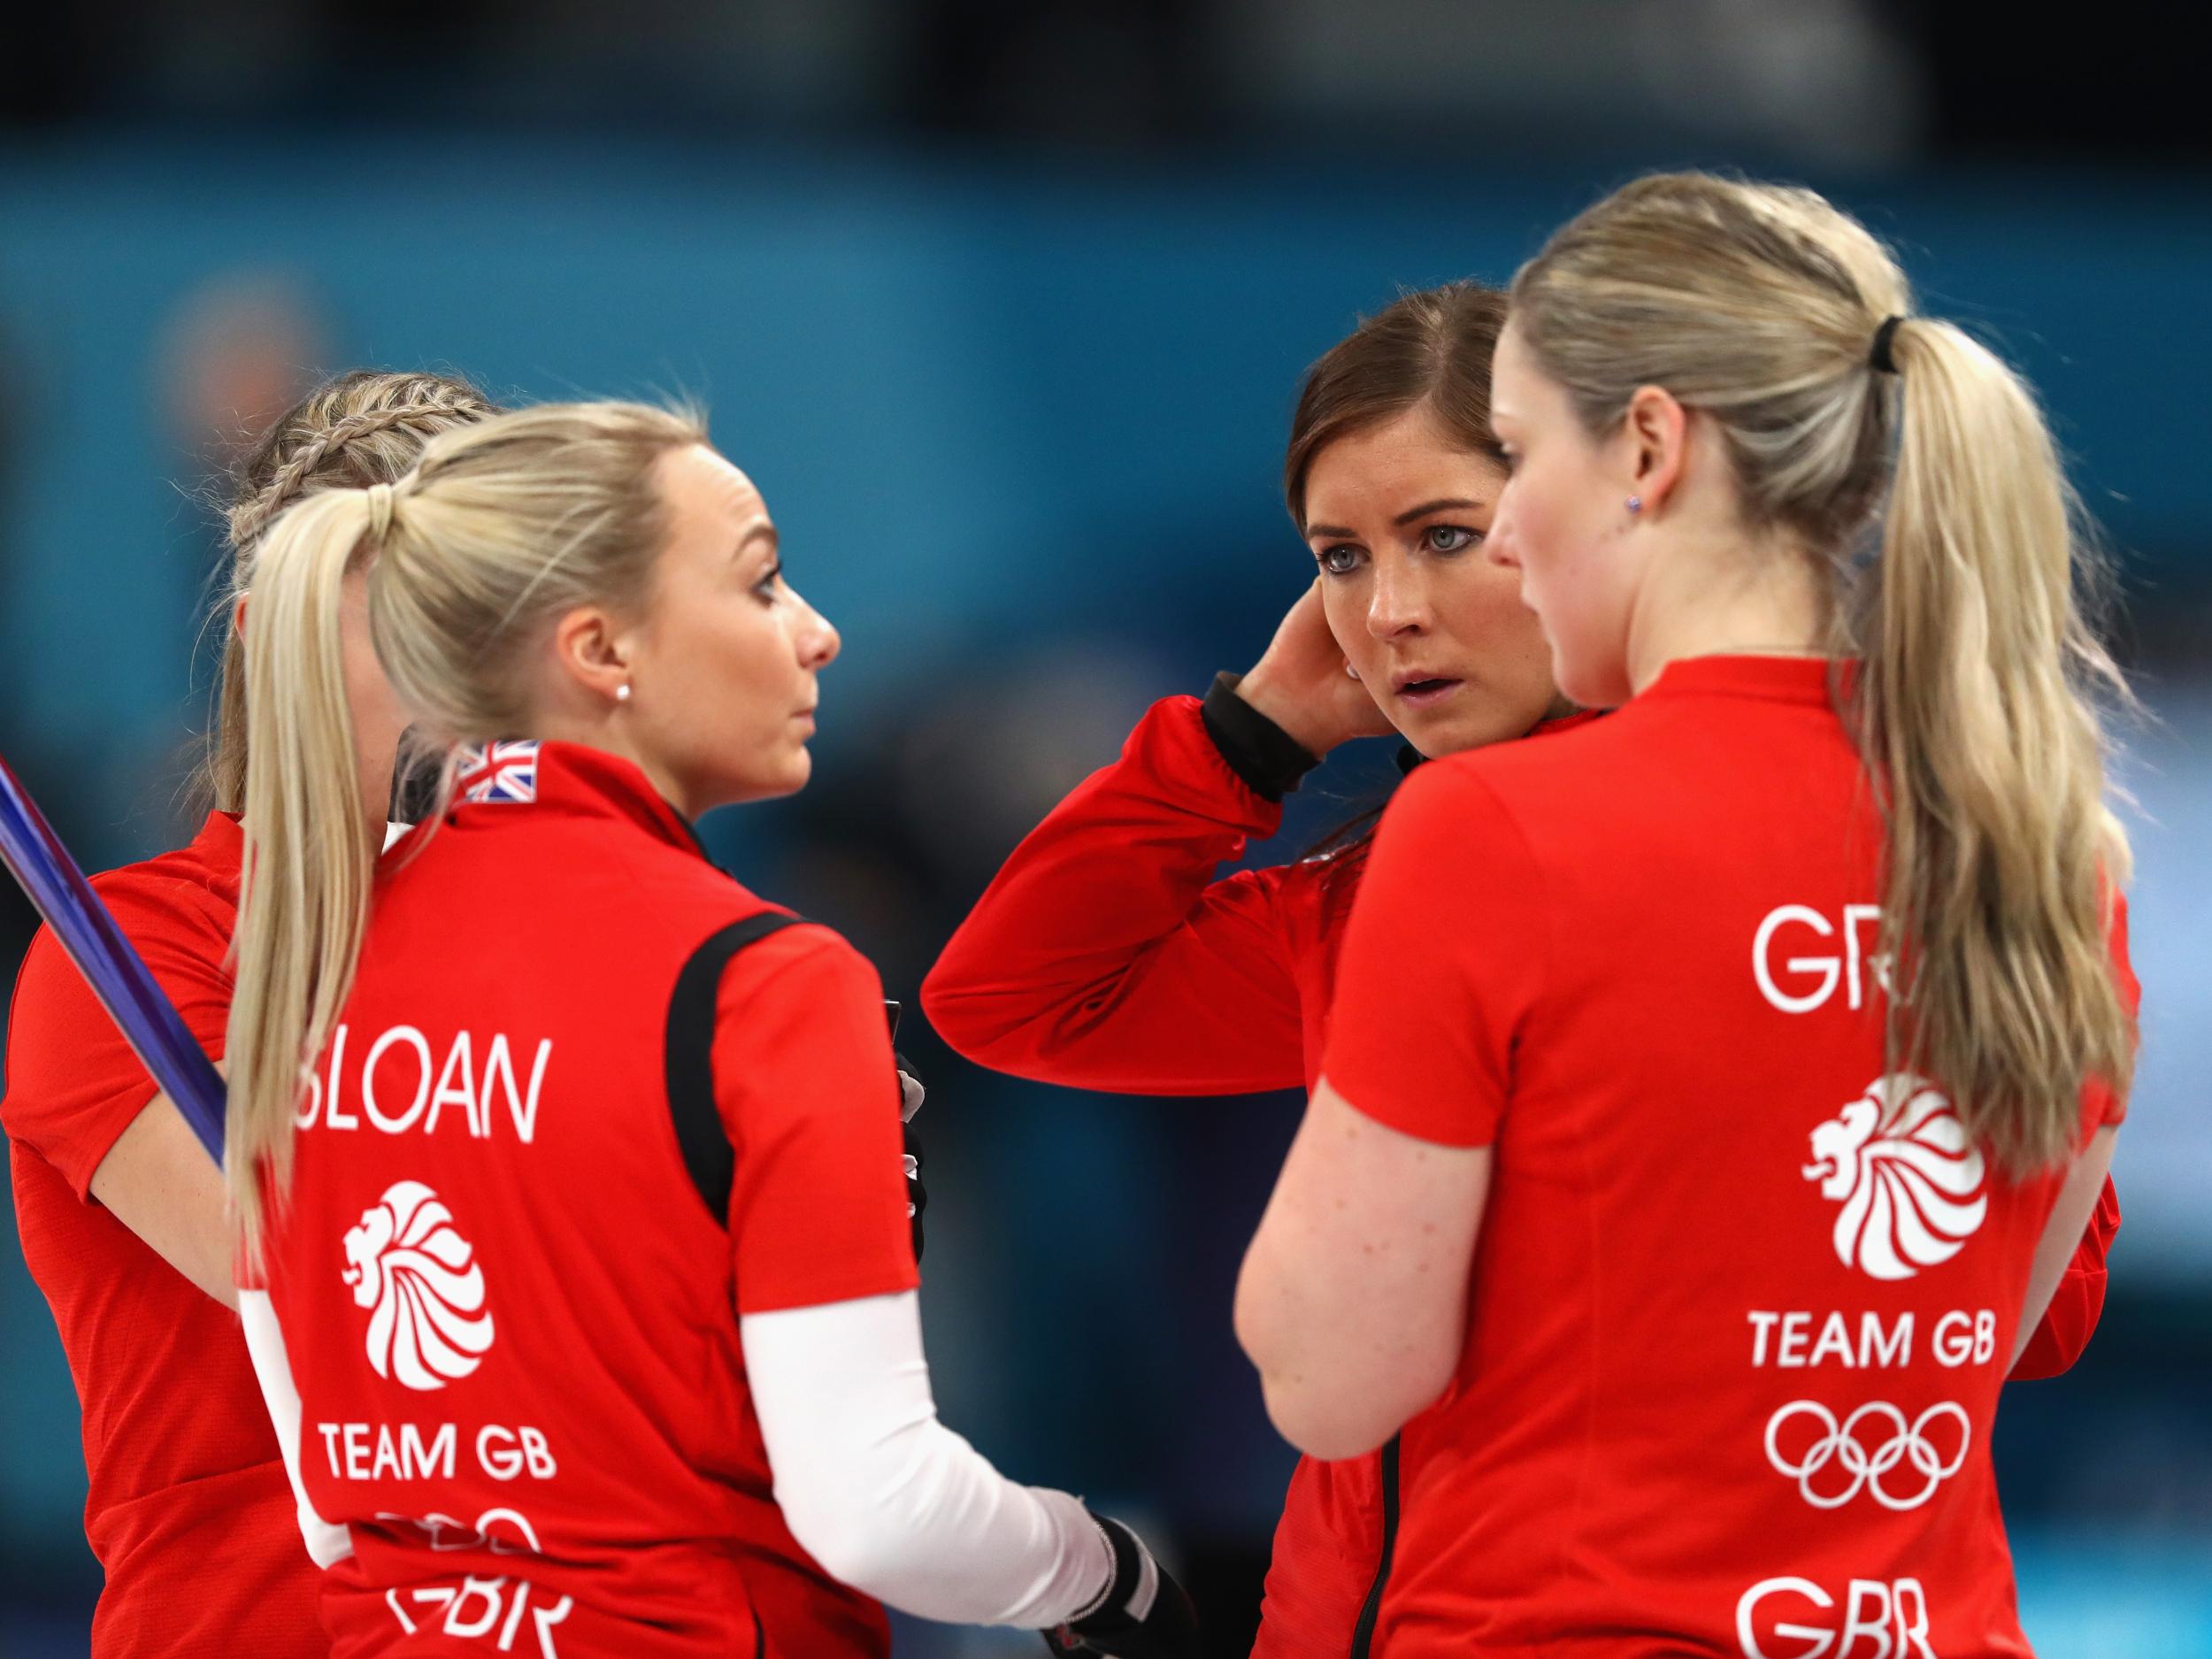 The women's curlers were unable to retain their bronze medal from four years ago